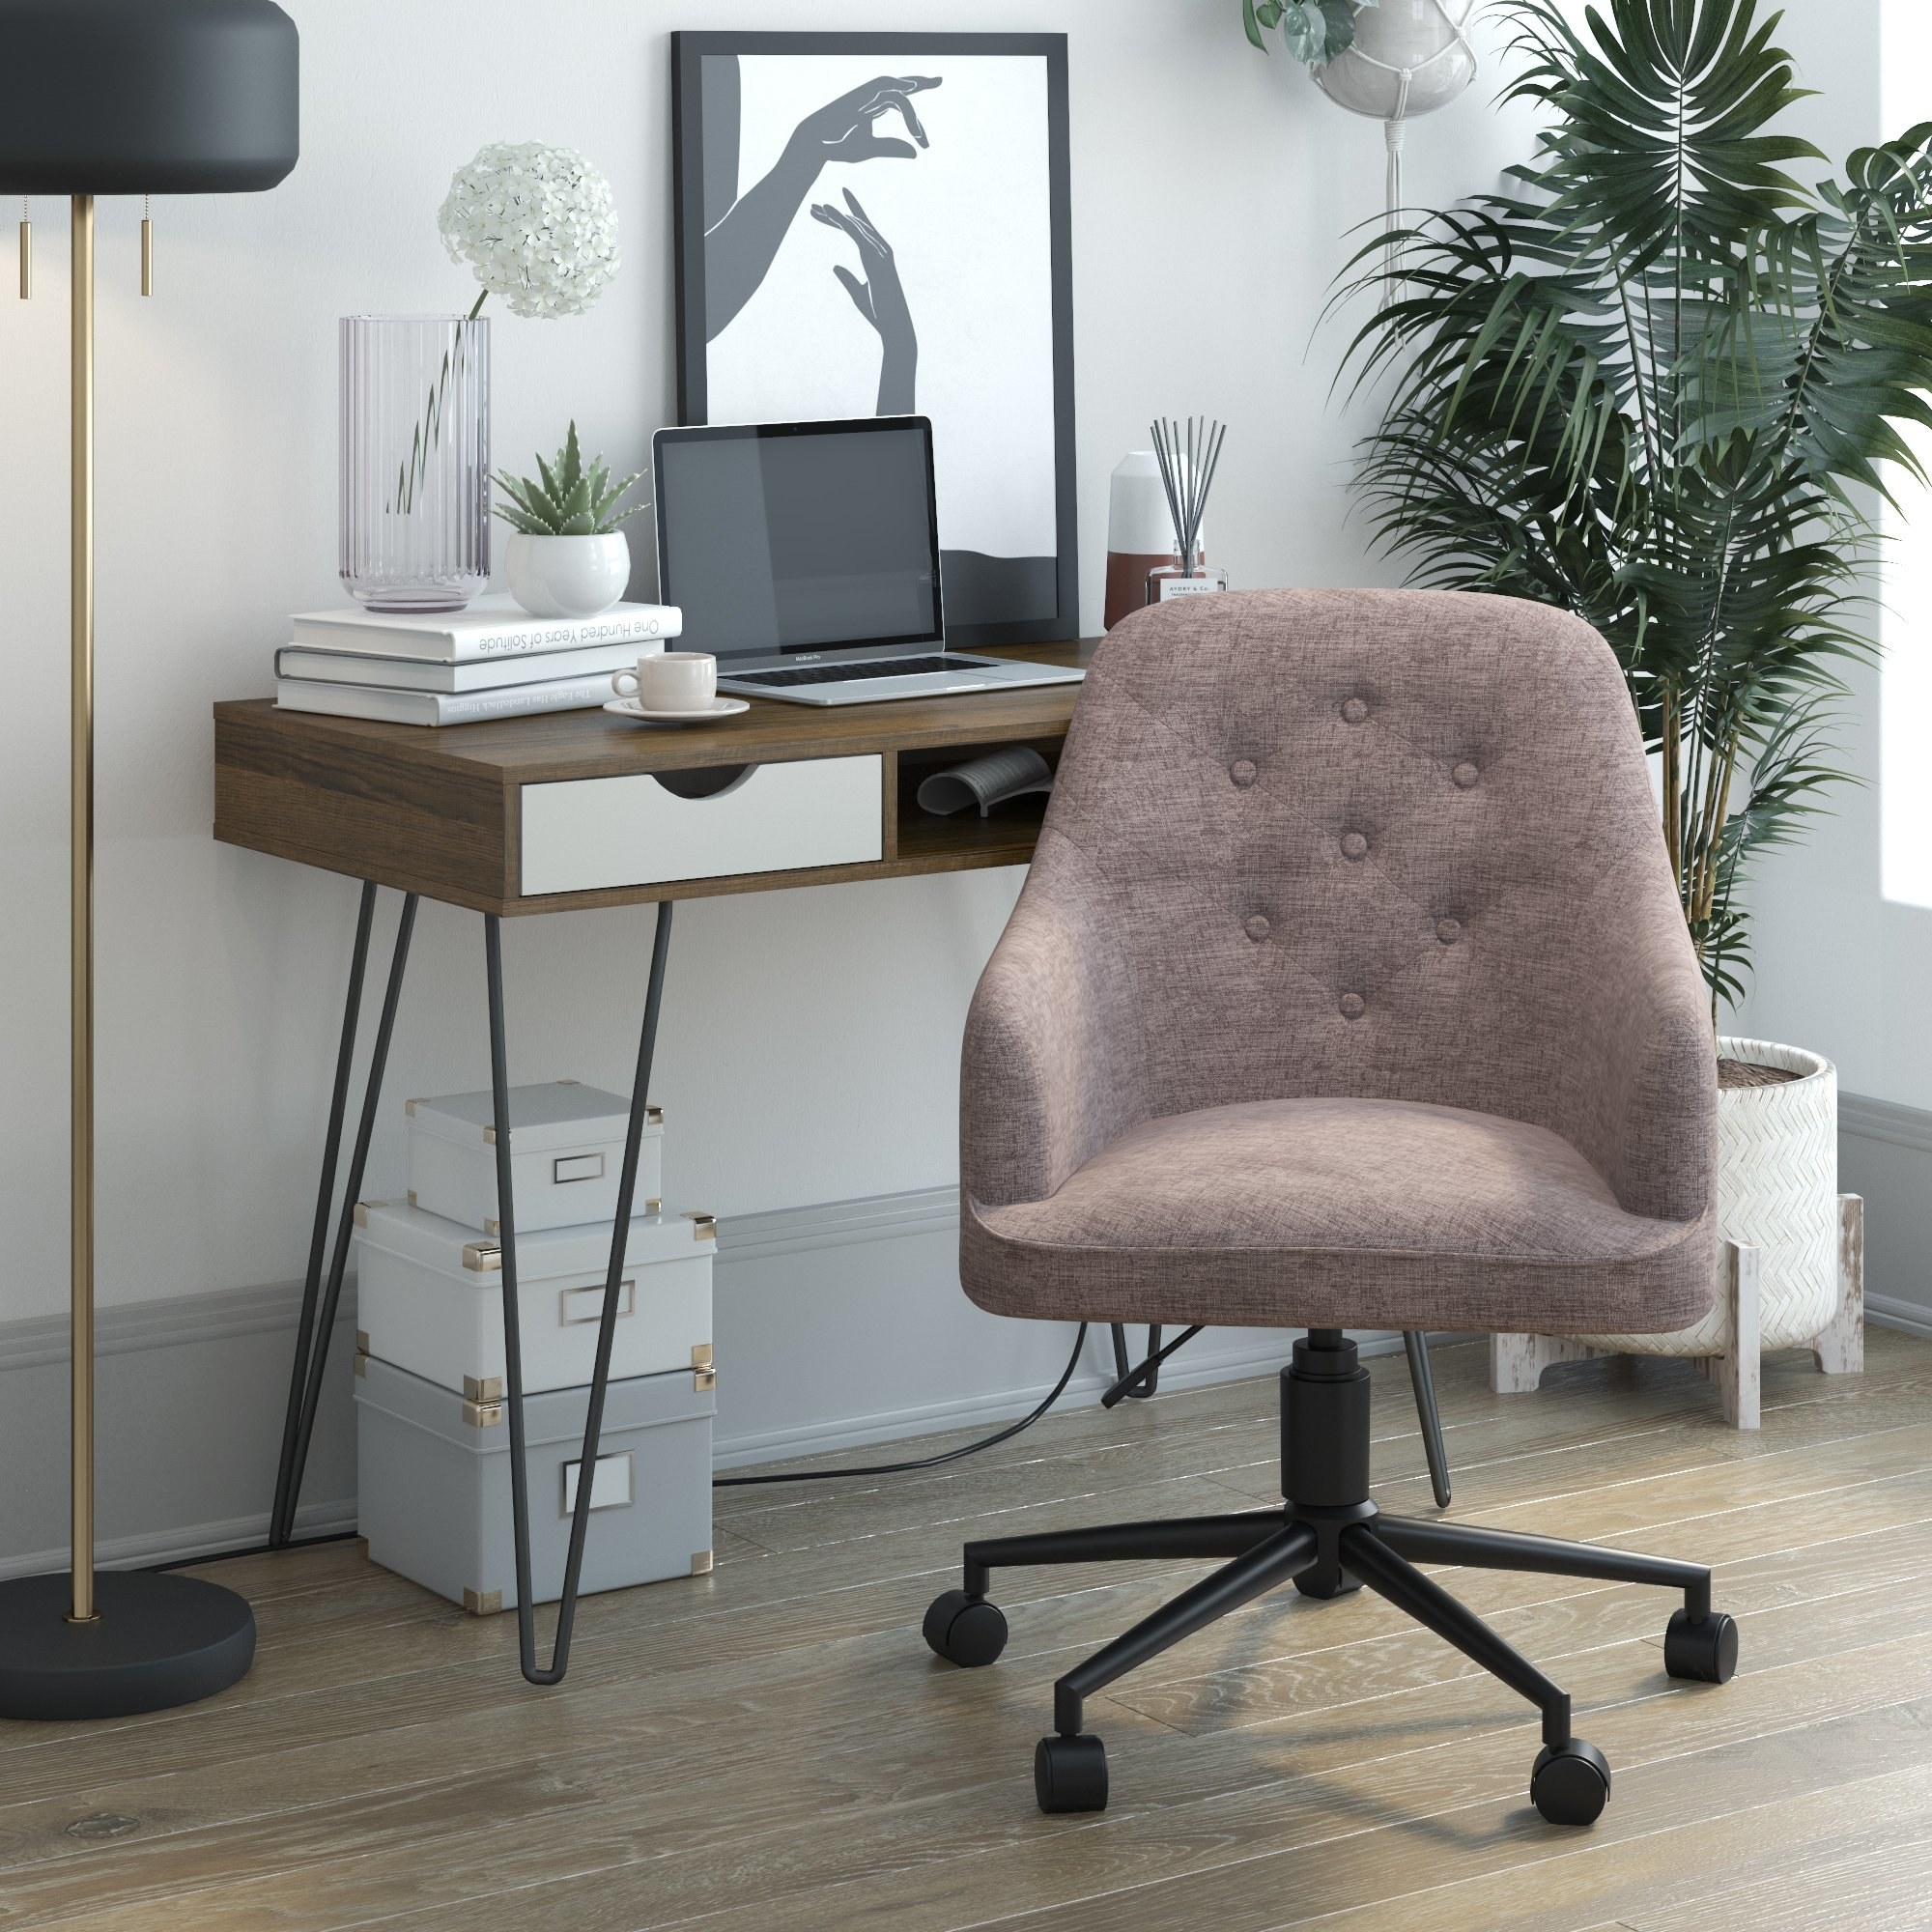 The office chair in the color Grey Linen